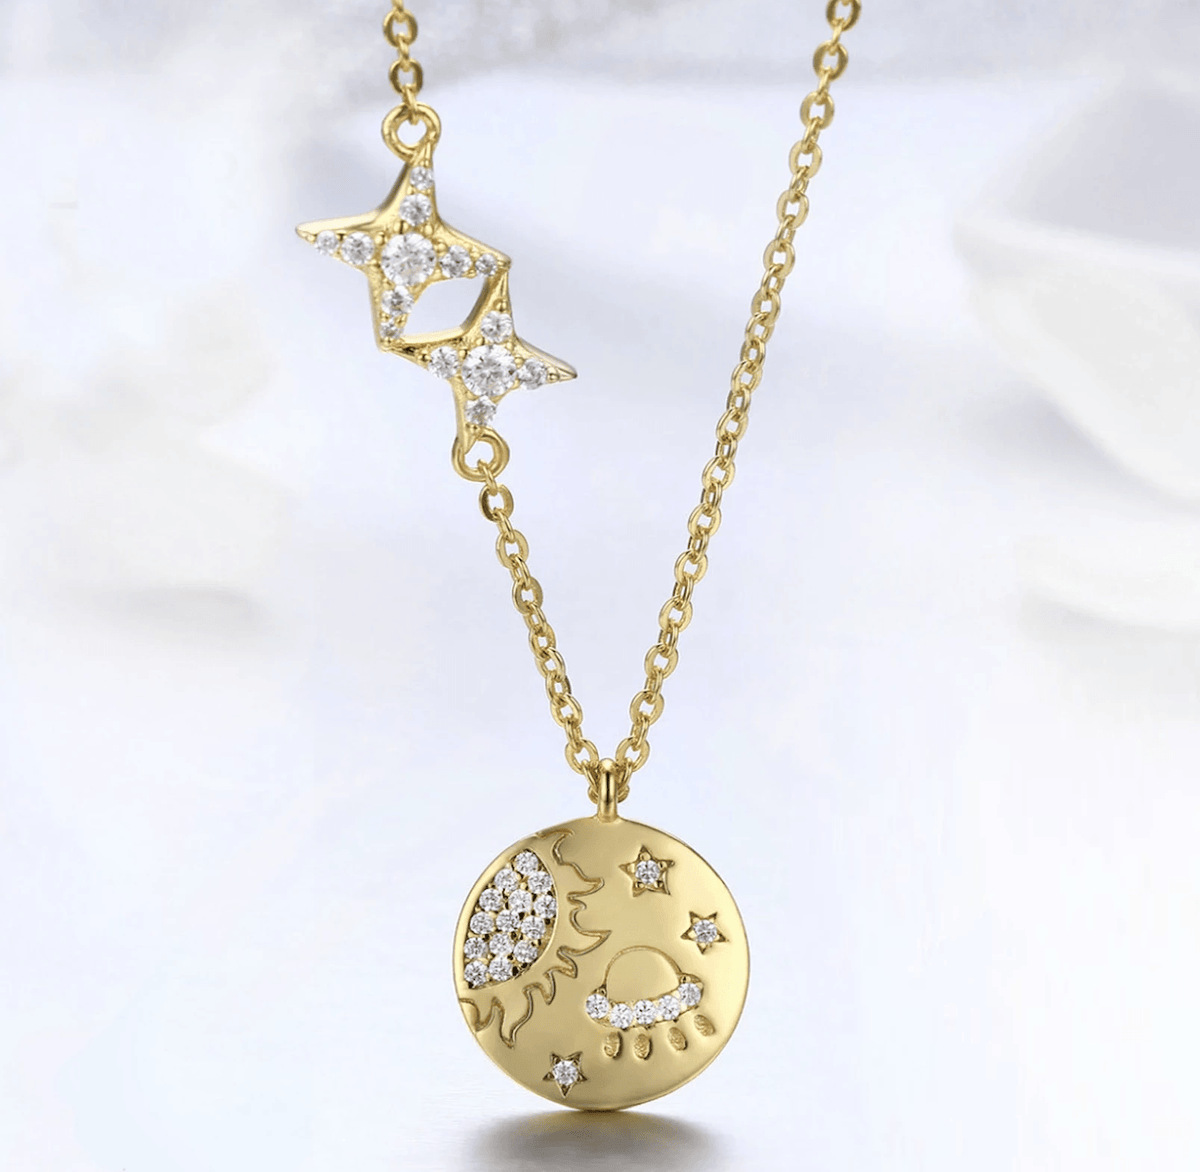 Dazzling Space Necklace - Solar Eclipse Charge Pendant in Stunning 14K Gold Vermeil